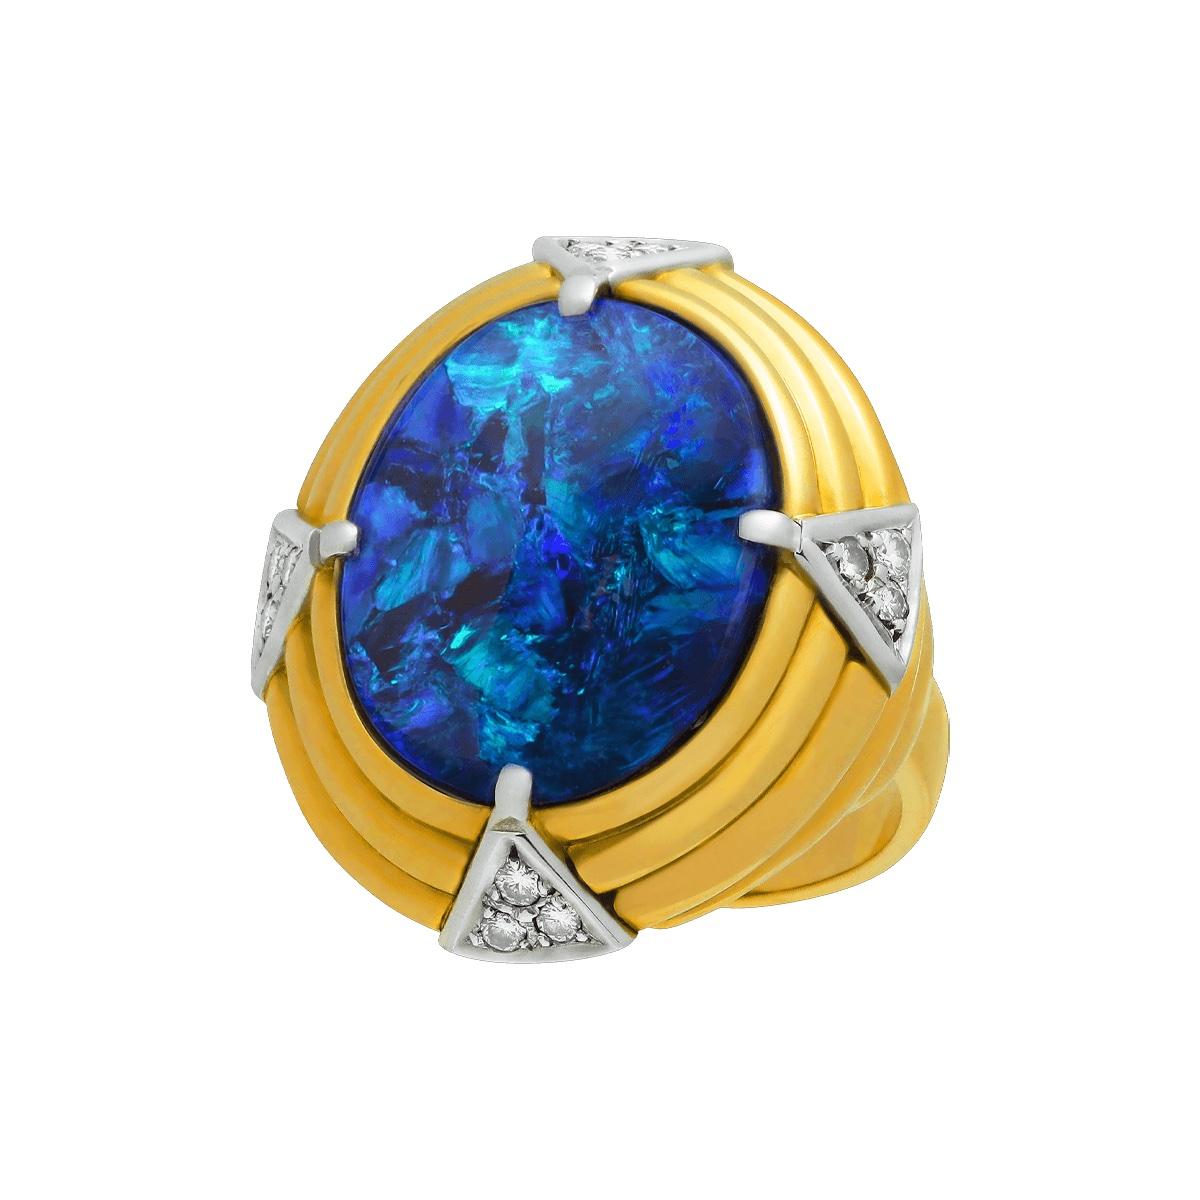 A classic beauty from a bygone era. This magnificent black opal with its deep mysterious blues heralds from a design era when class and sophistication meant everything. Old world charm in this statement piece. Solid 18K gold with platinum accents